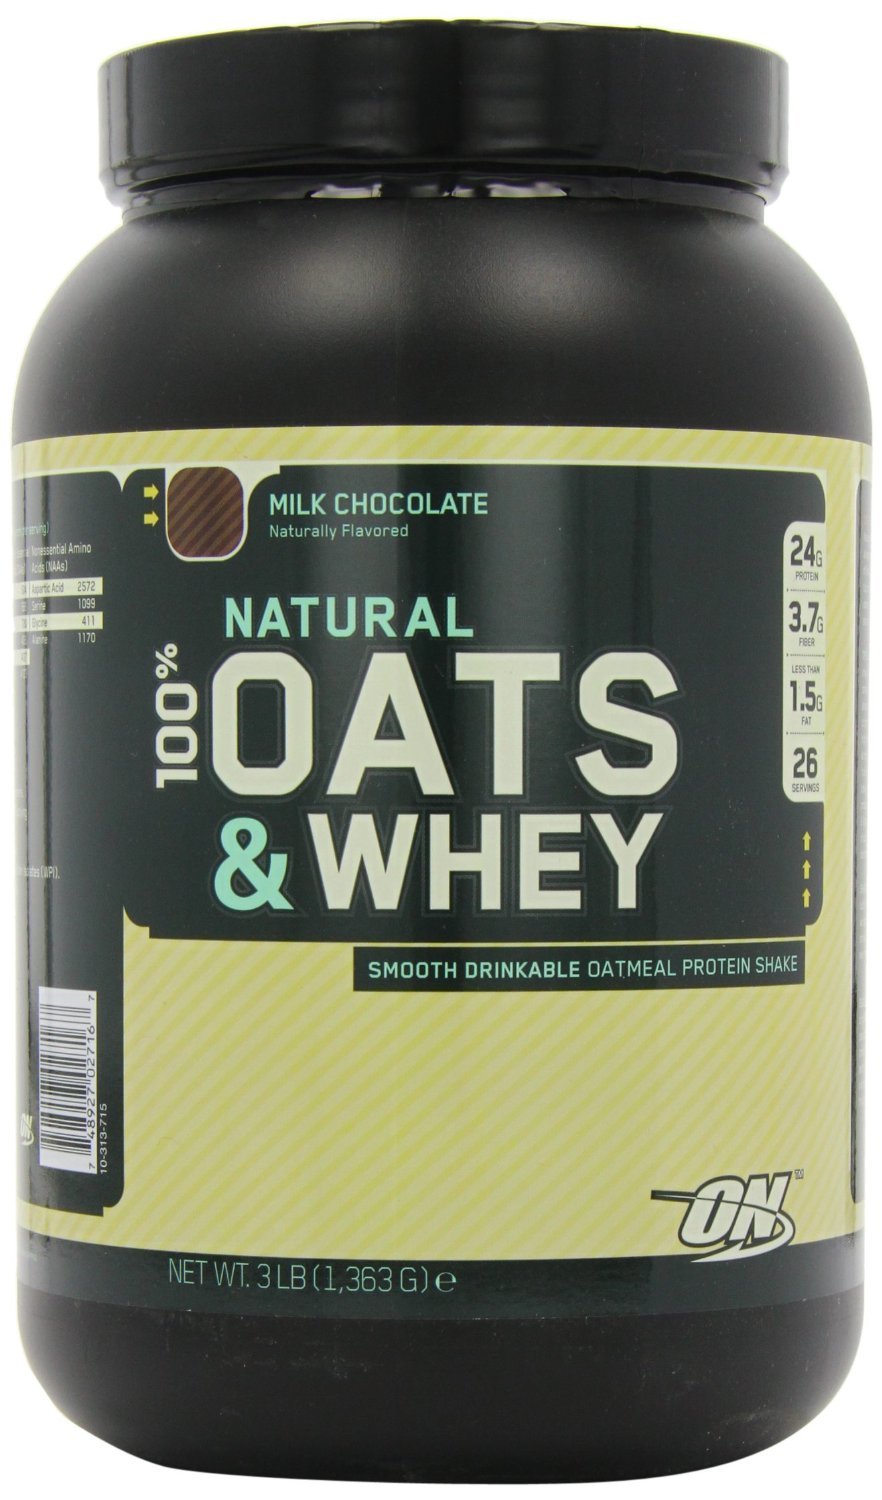 100% Natural Oats & Whey, 1363 g, Optimum Nutrition. Whey Protein. recovery Anti-catabolic properties Lean muscle mass 